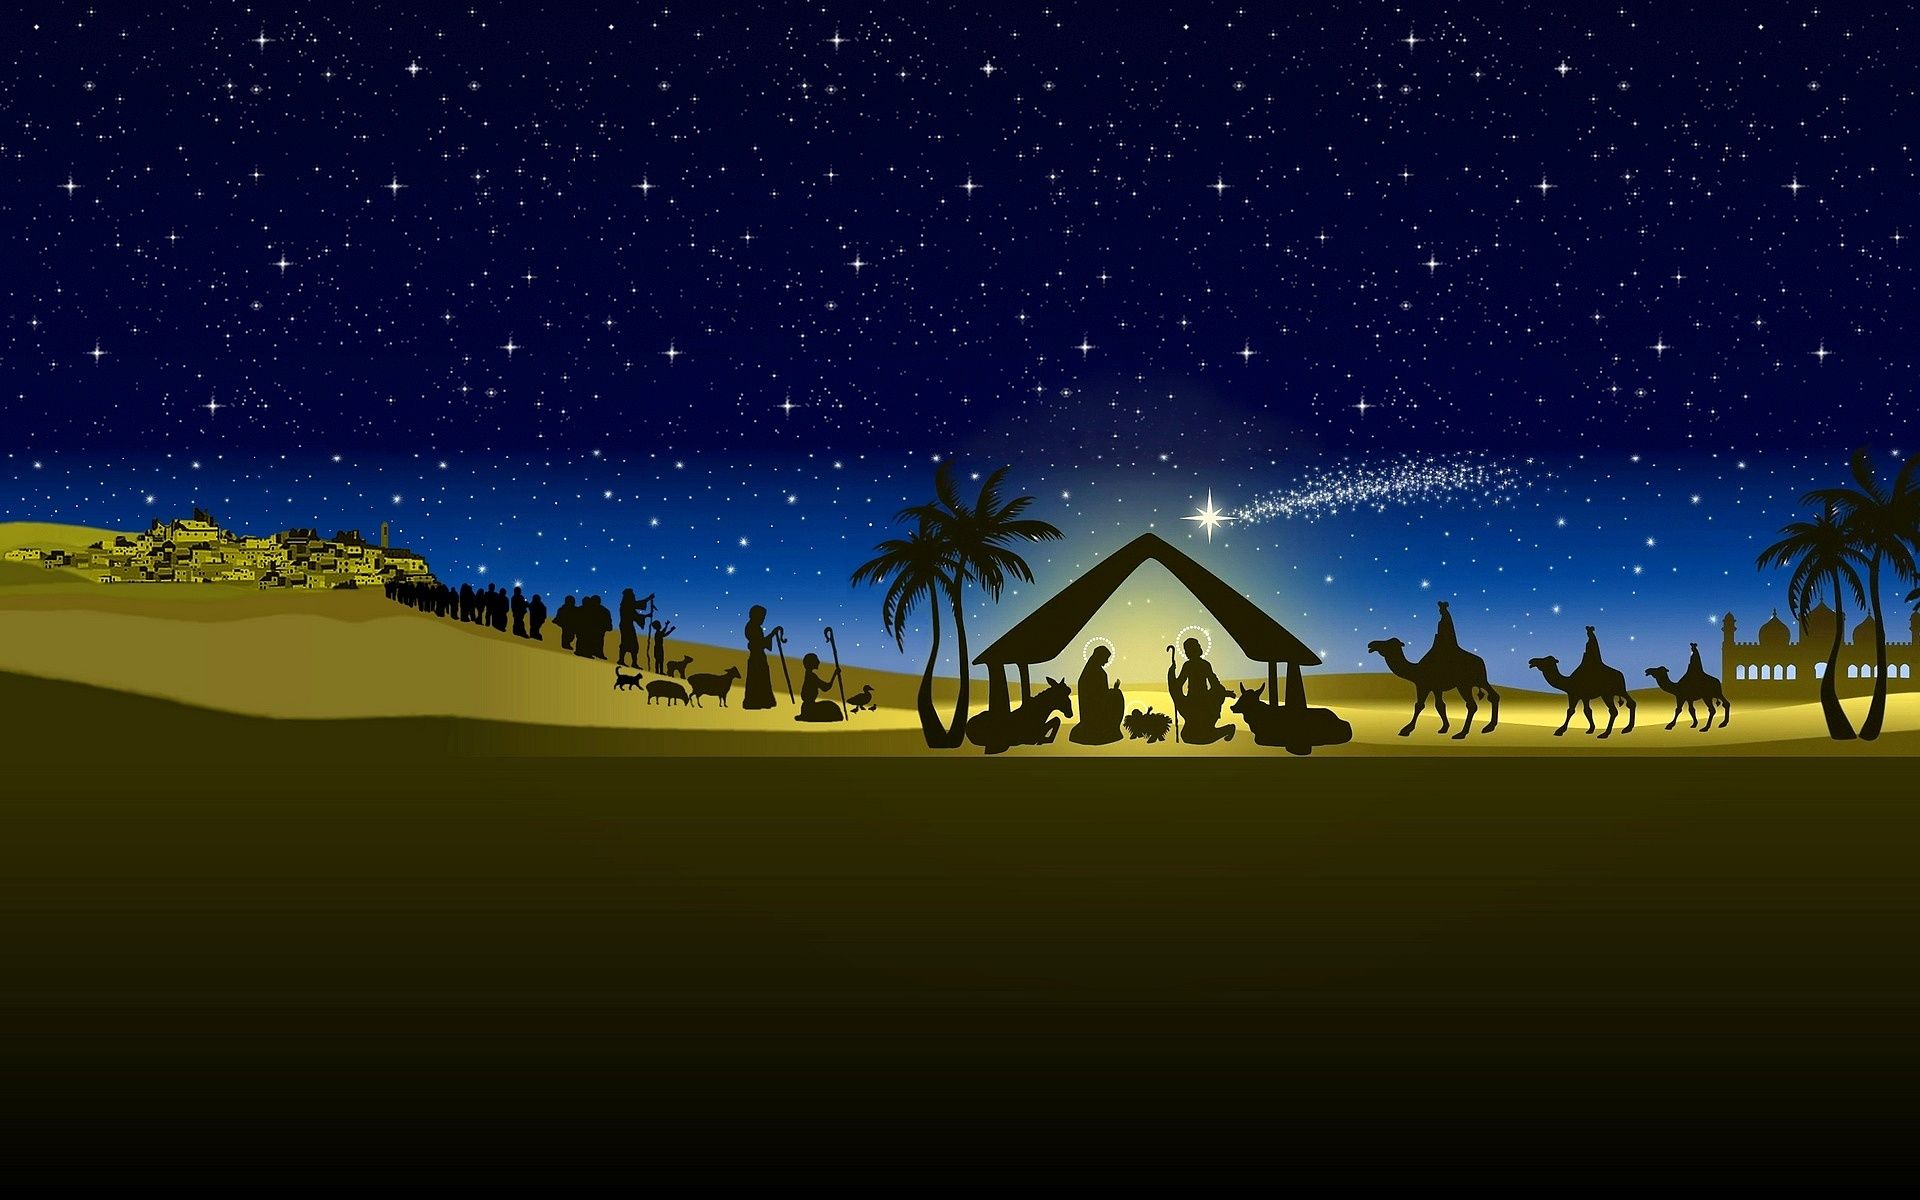 christmas-nativity-background-images-nativity-vector-hd-wallpaper-list-nativity-backgrounds-free-wallpaper-widescreen-for-android-hd-iphone-ipad-4-downloads ...